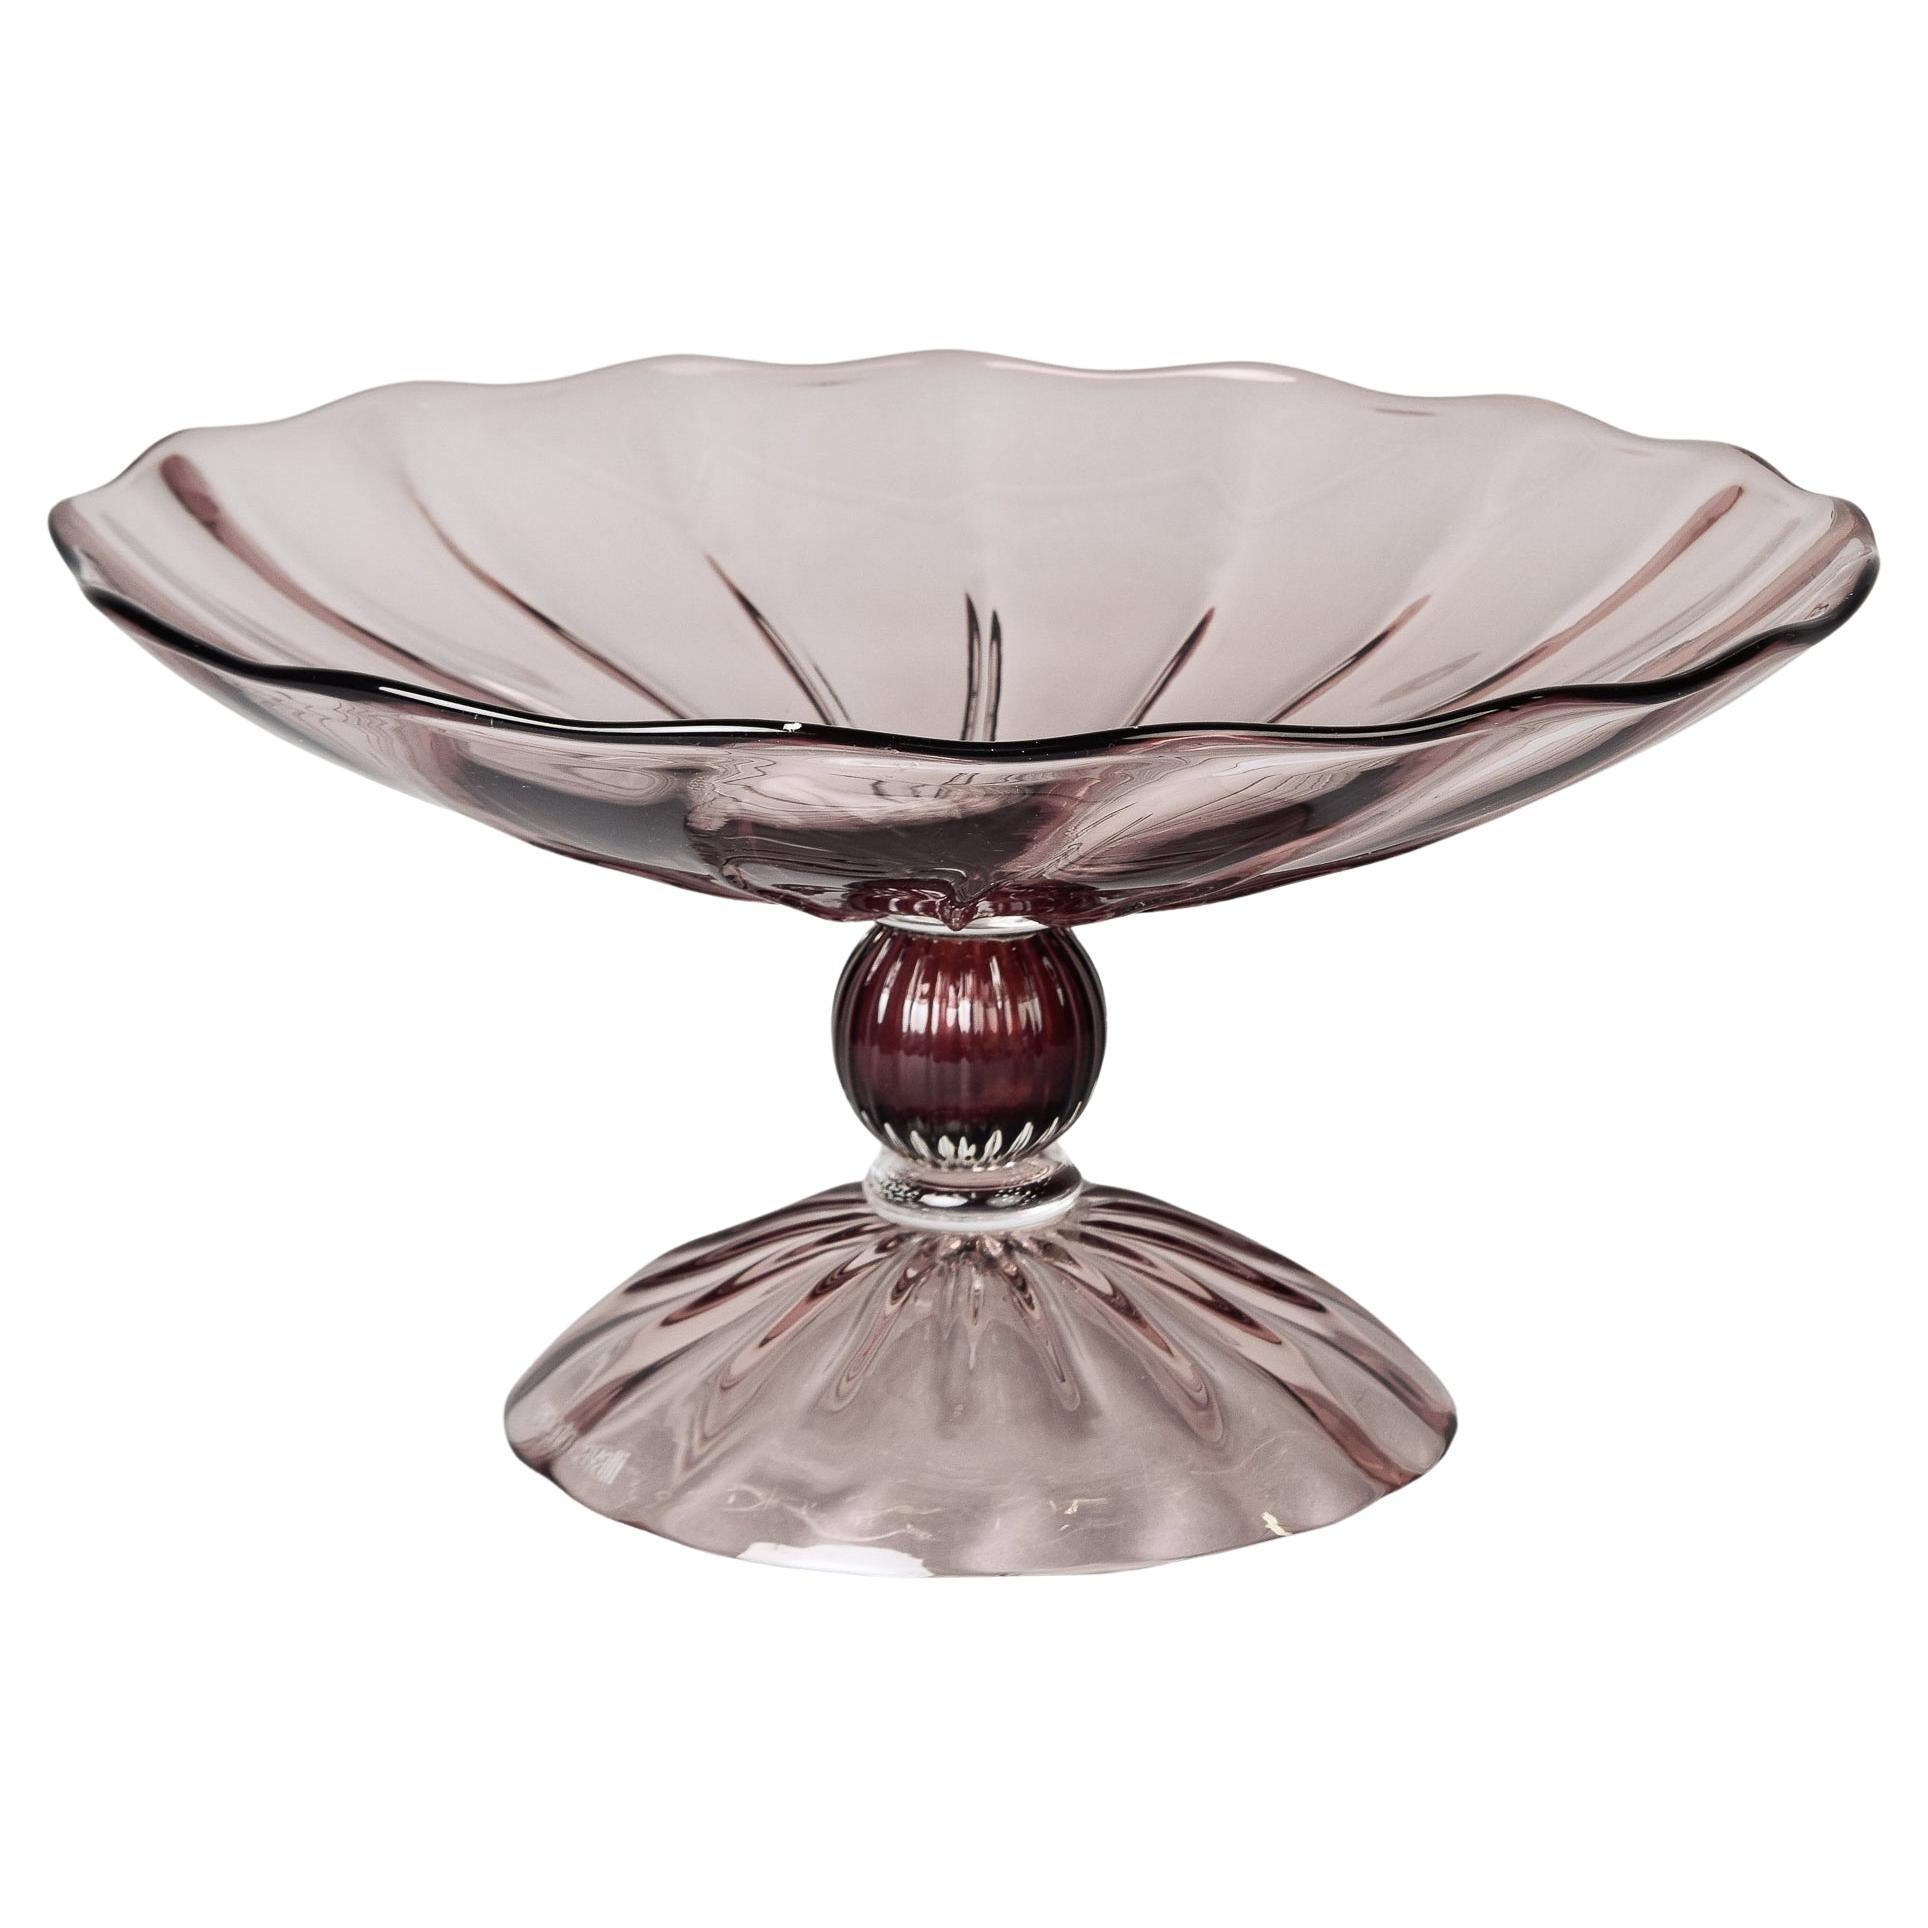 Large Vintage Signed Roberto Cavalli Pale Amethyst Glass Tazza or Pedestal Bowl For Sale